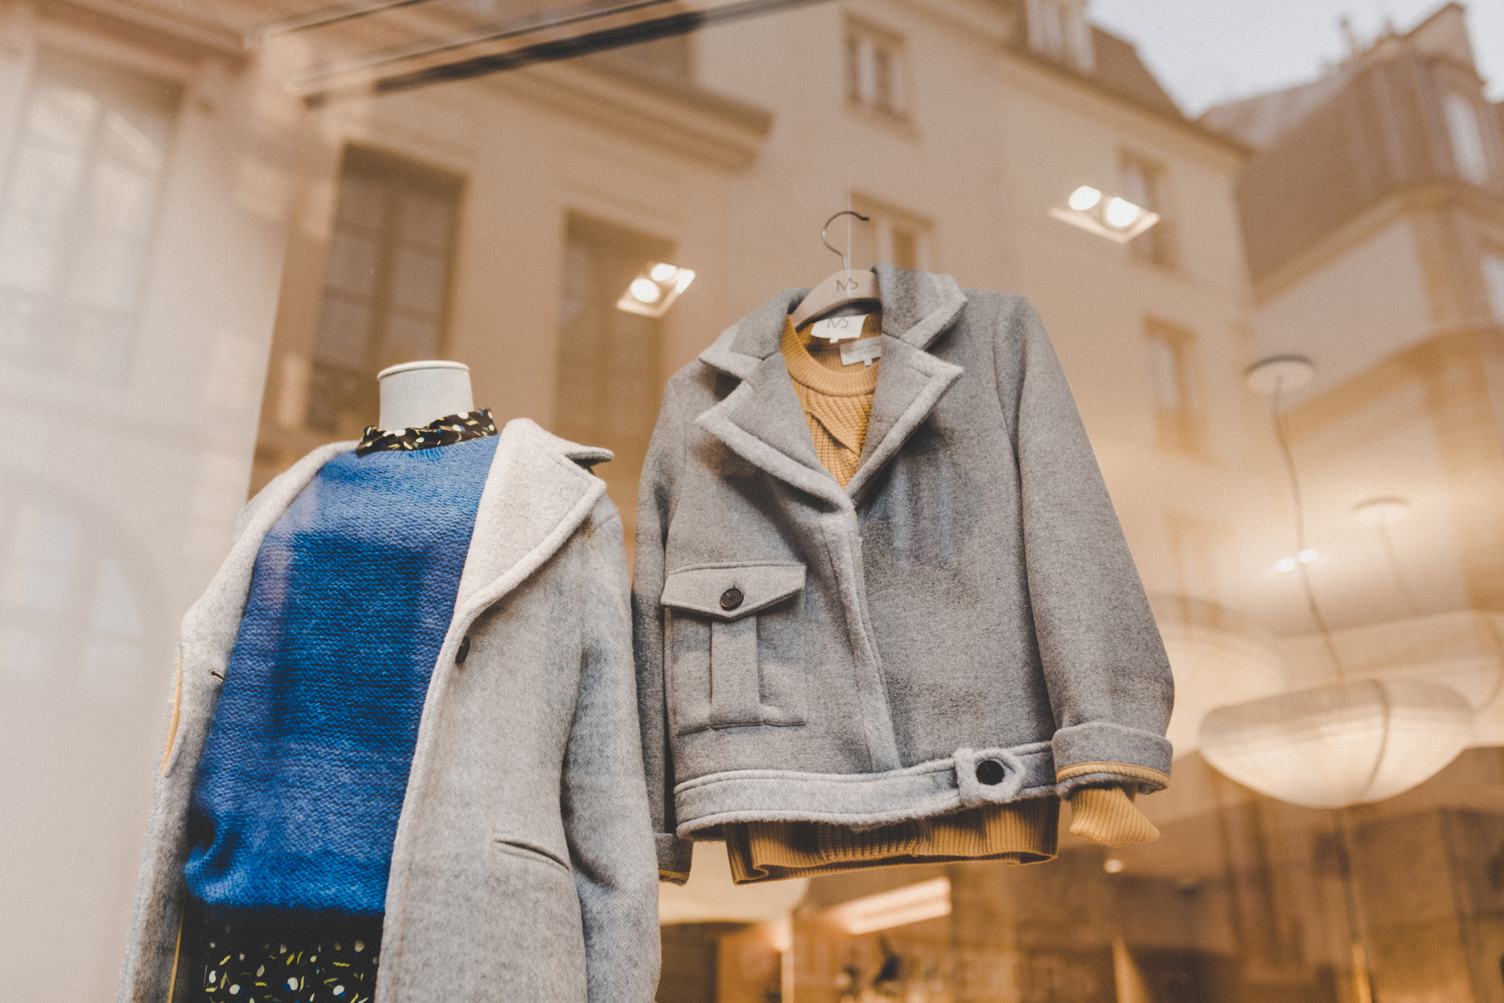 Boutique Window with Hangers and Gray Jackets